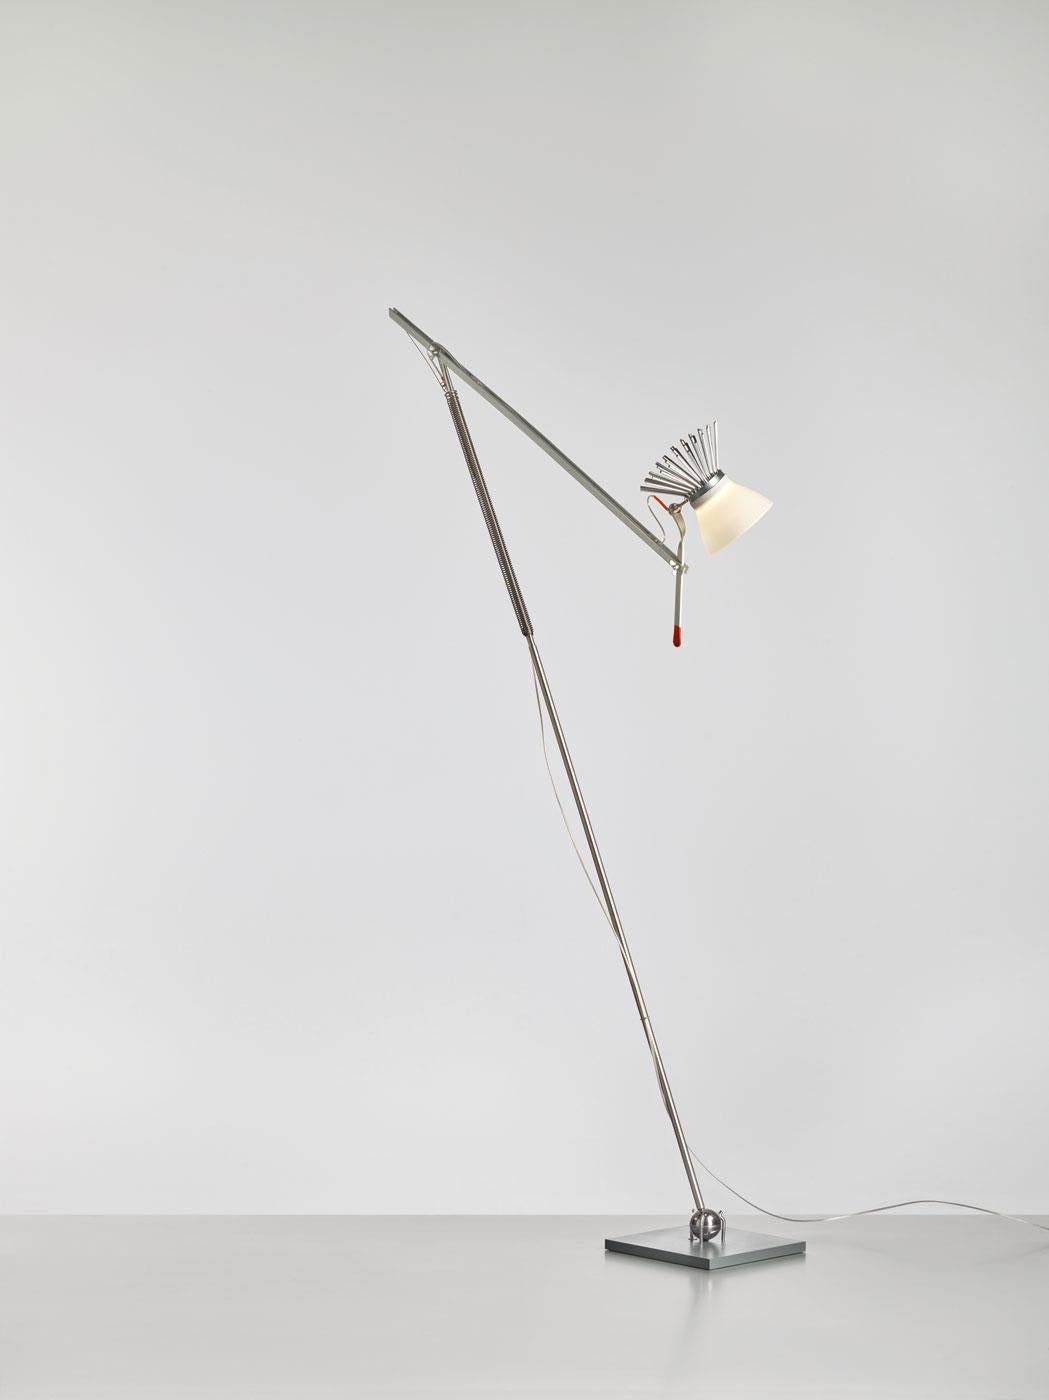 Bastardo by
Bernhard Dessecker / Ingo Maurer, 2015
Desk or floor lamp. The angle is adjustable by the ball joint in the base. An included extension rod turns the desk lamp into a floor lamp. Steel, aluminum, plastic. Bastardo is the follow-up